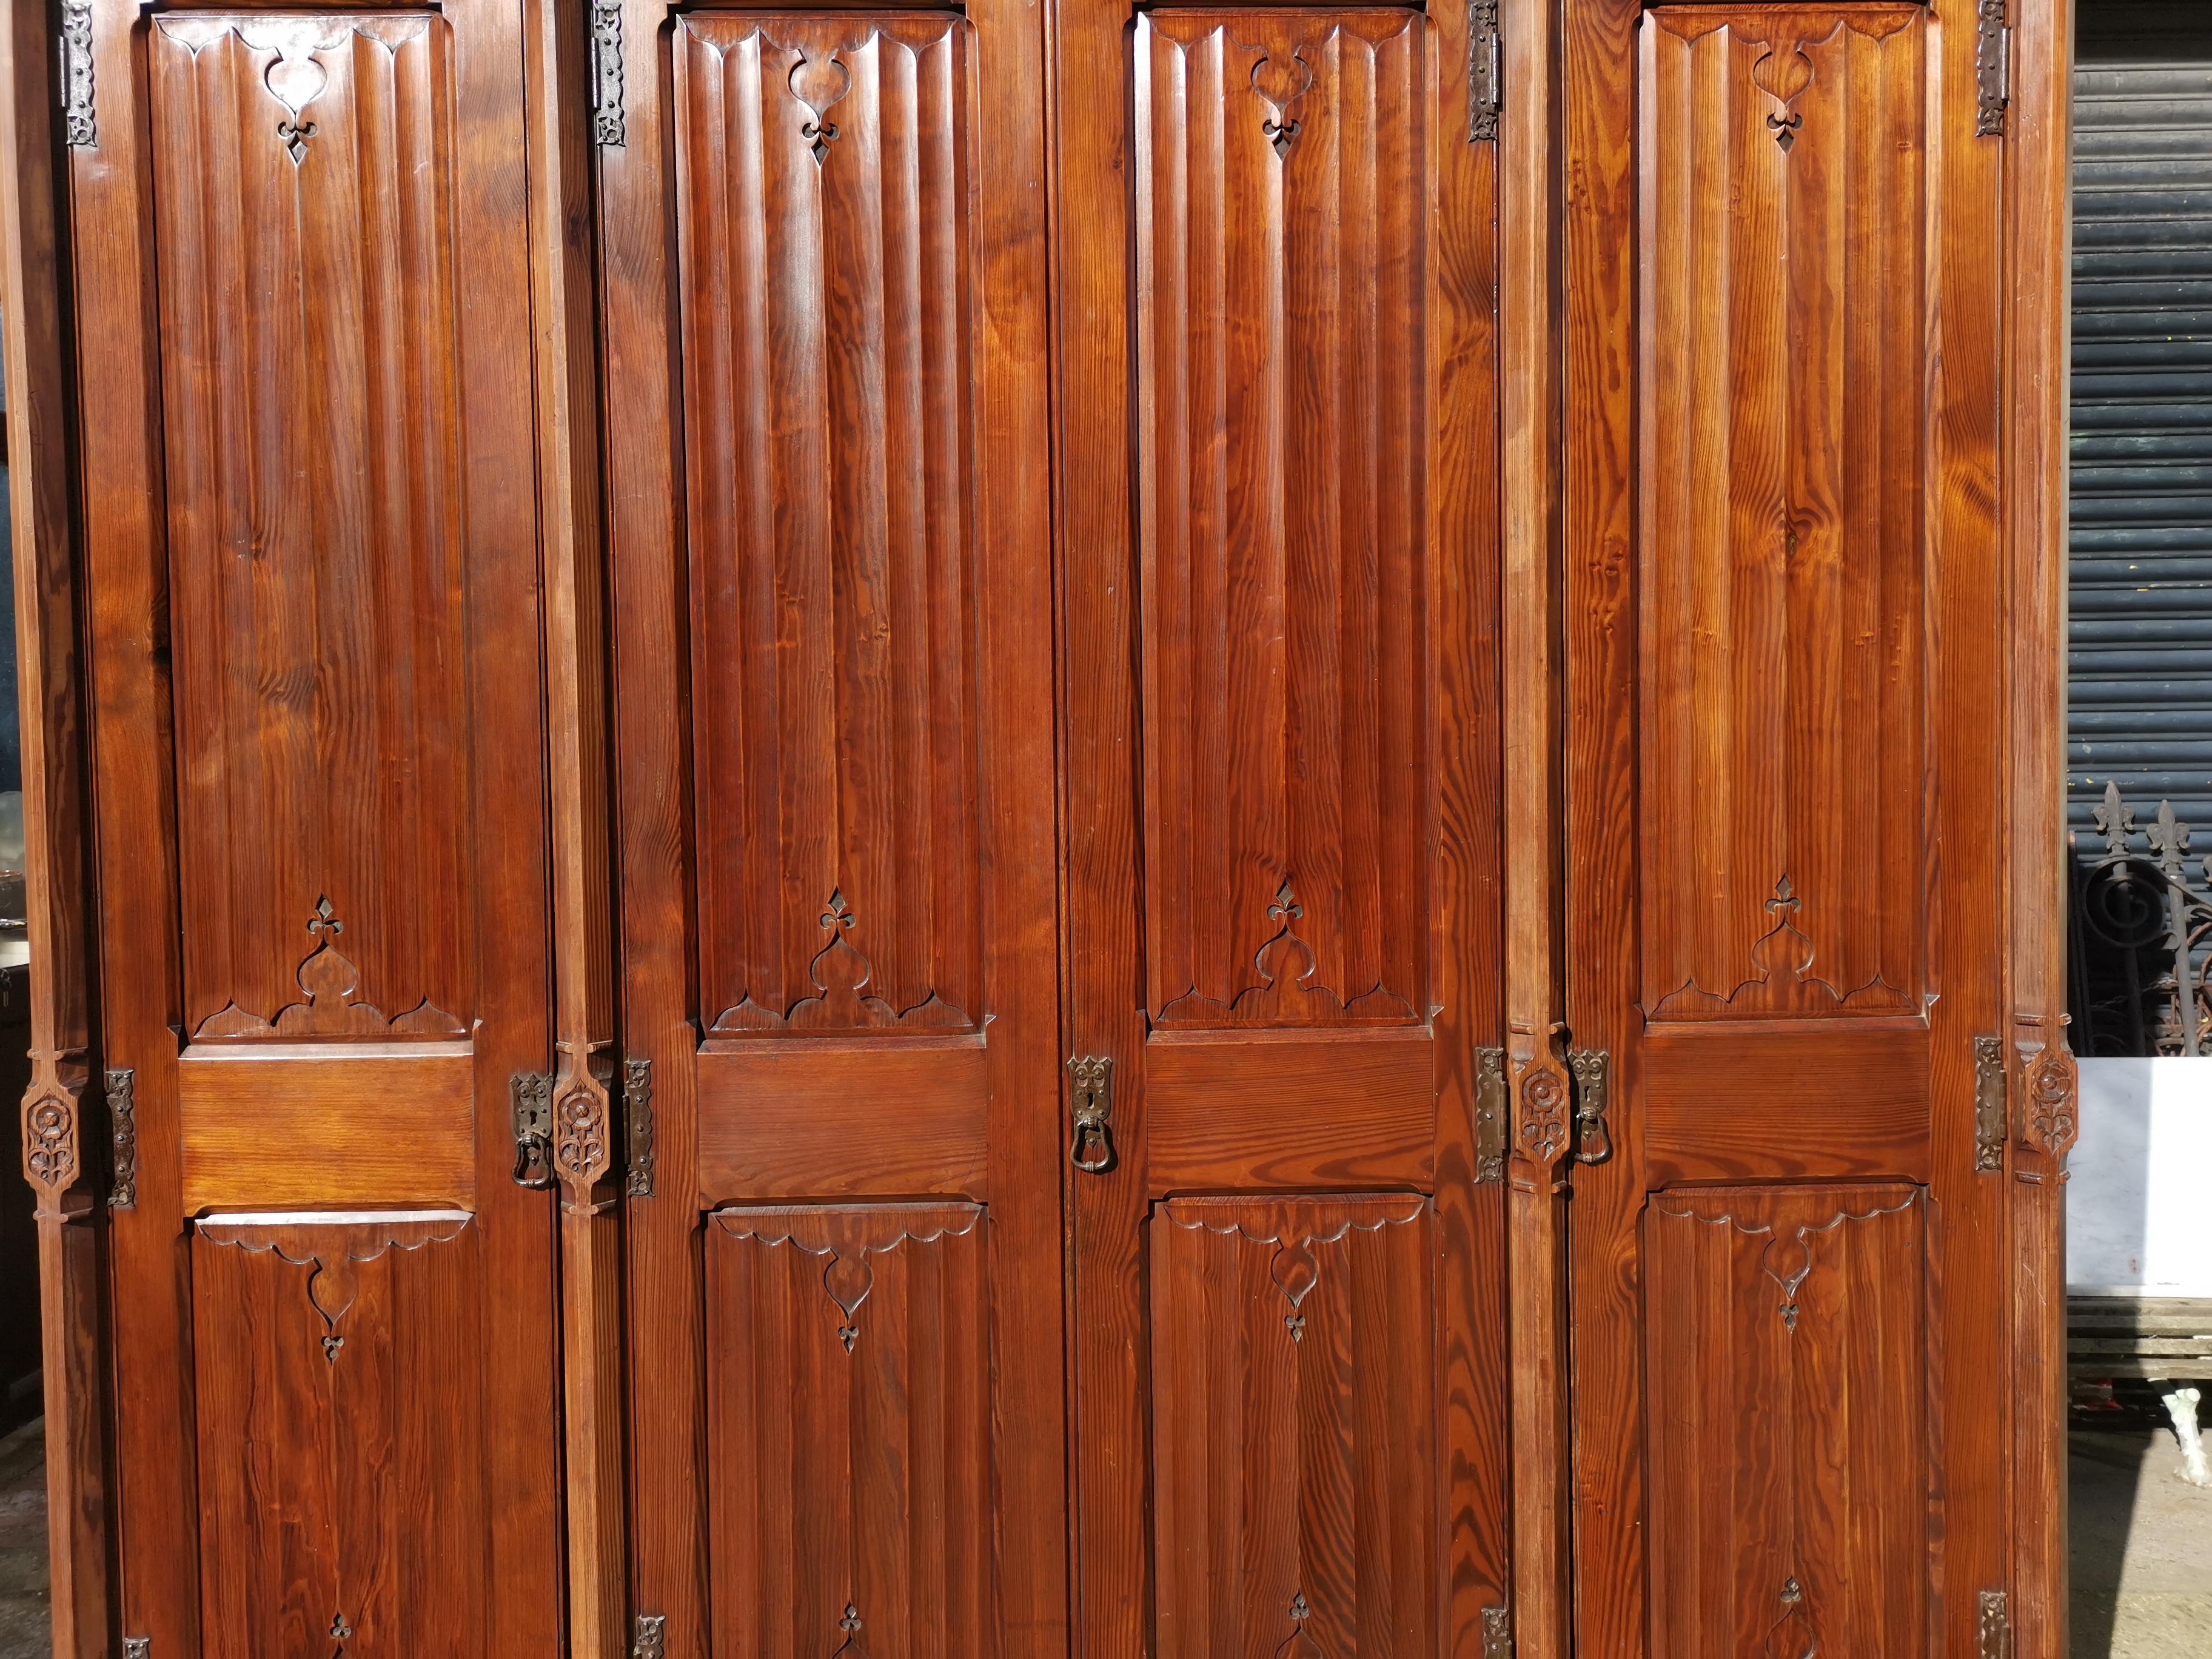 A W N Pugin. Made by John Gregory Crace.
A rare Gothic Revival four-door pitch pine wardrobe with hand-carved fleur de ley finials flanked with castellated hand-carved details to the cornice, and a compilation of four dots below each finial. A